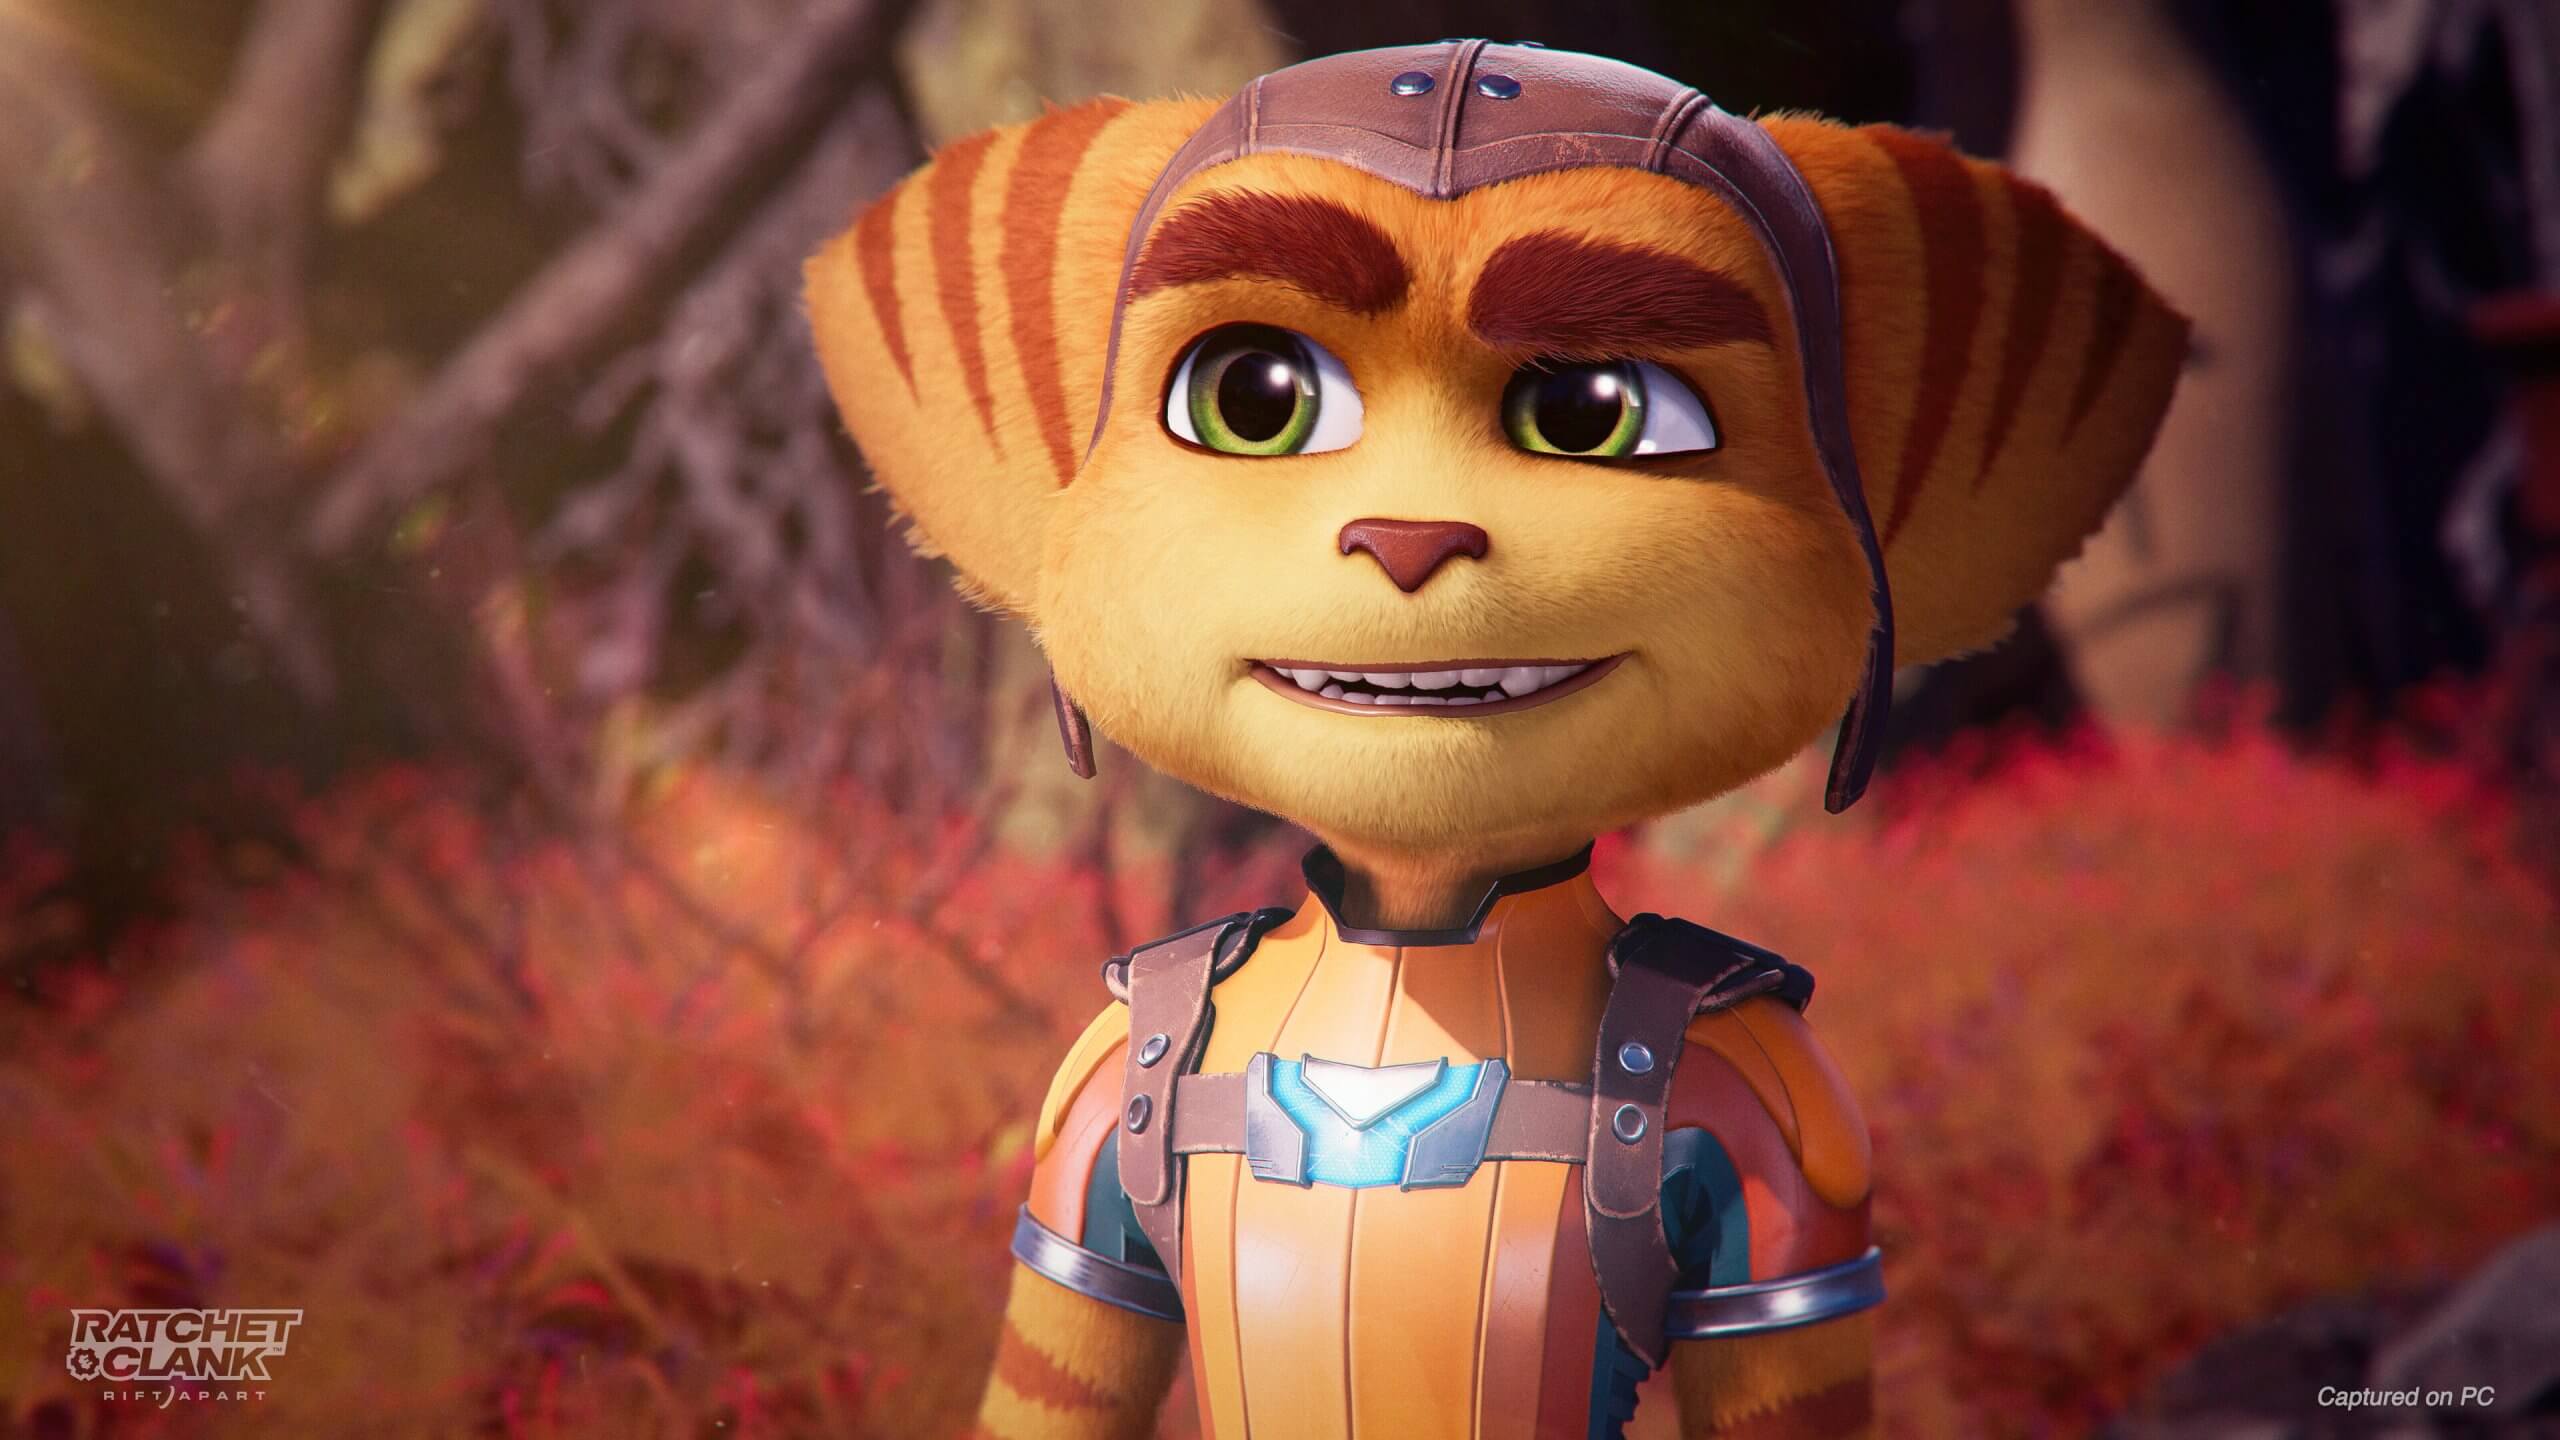 First Ratchet & Clank Rift Apart PC patch improves Ray Tracing visuals